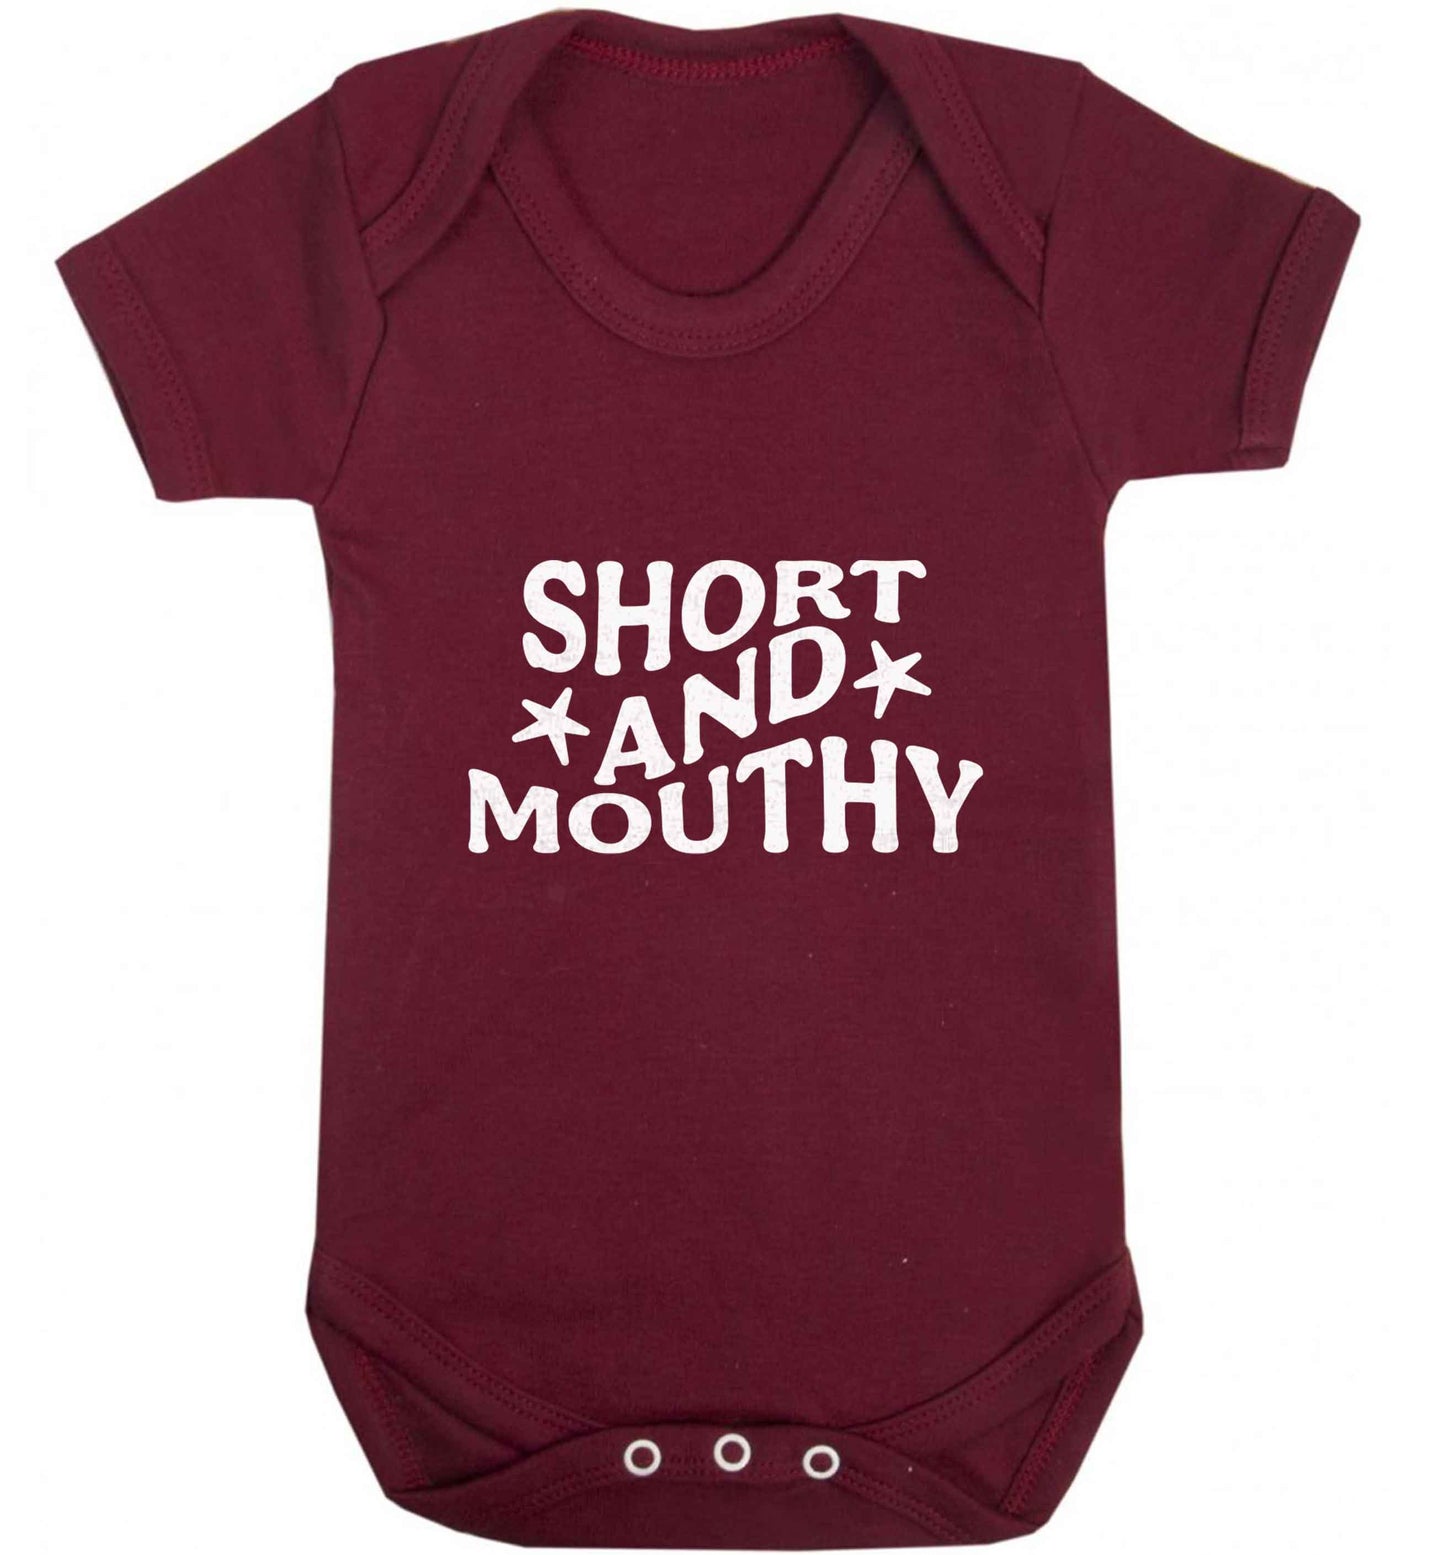 Short and mouthy baby vest maroon 18-24 months